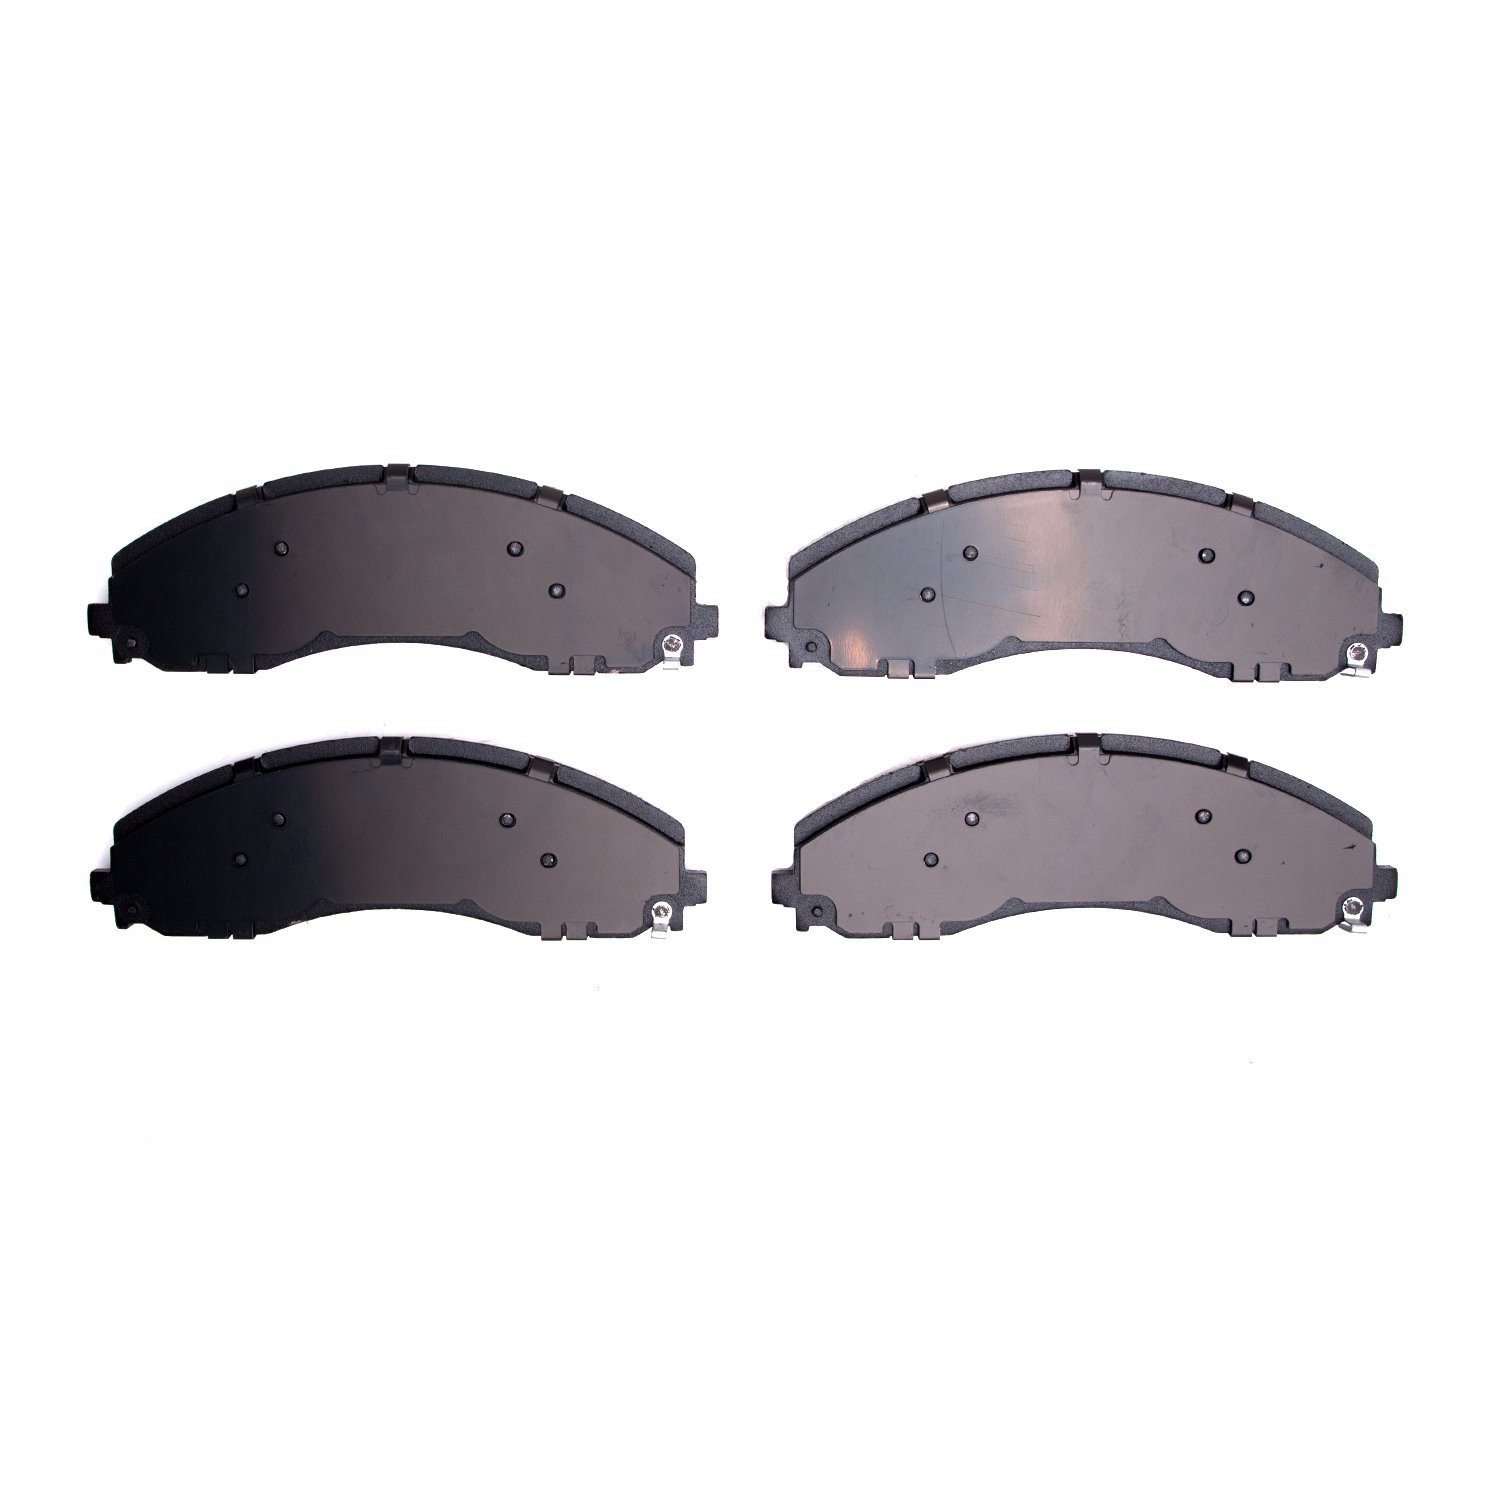 1400-2018-00 Ultimate-Duty Brake Pads Kit, Fits Select Ford/Lincoln/Mercury/Mazda, Position: Fr & Rr,Front,Fr,Rear,Rr